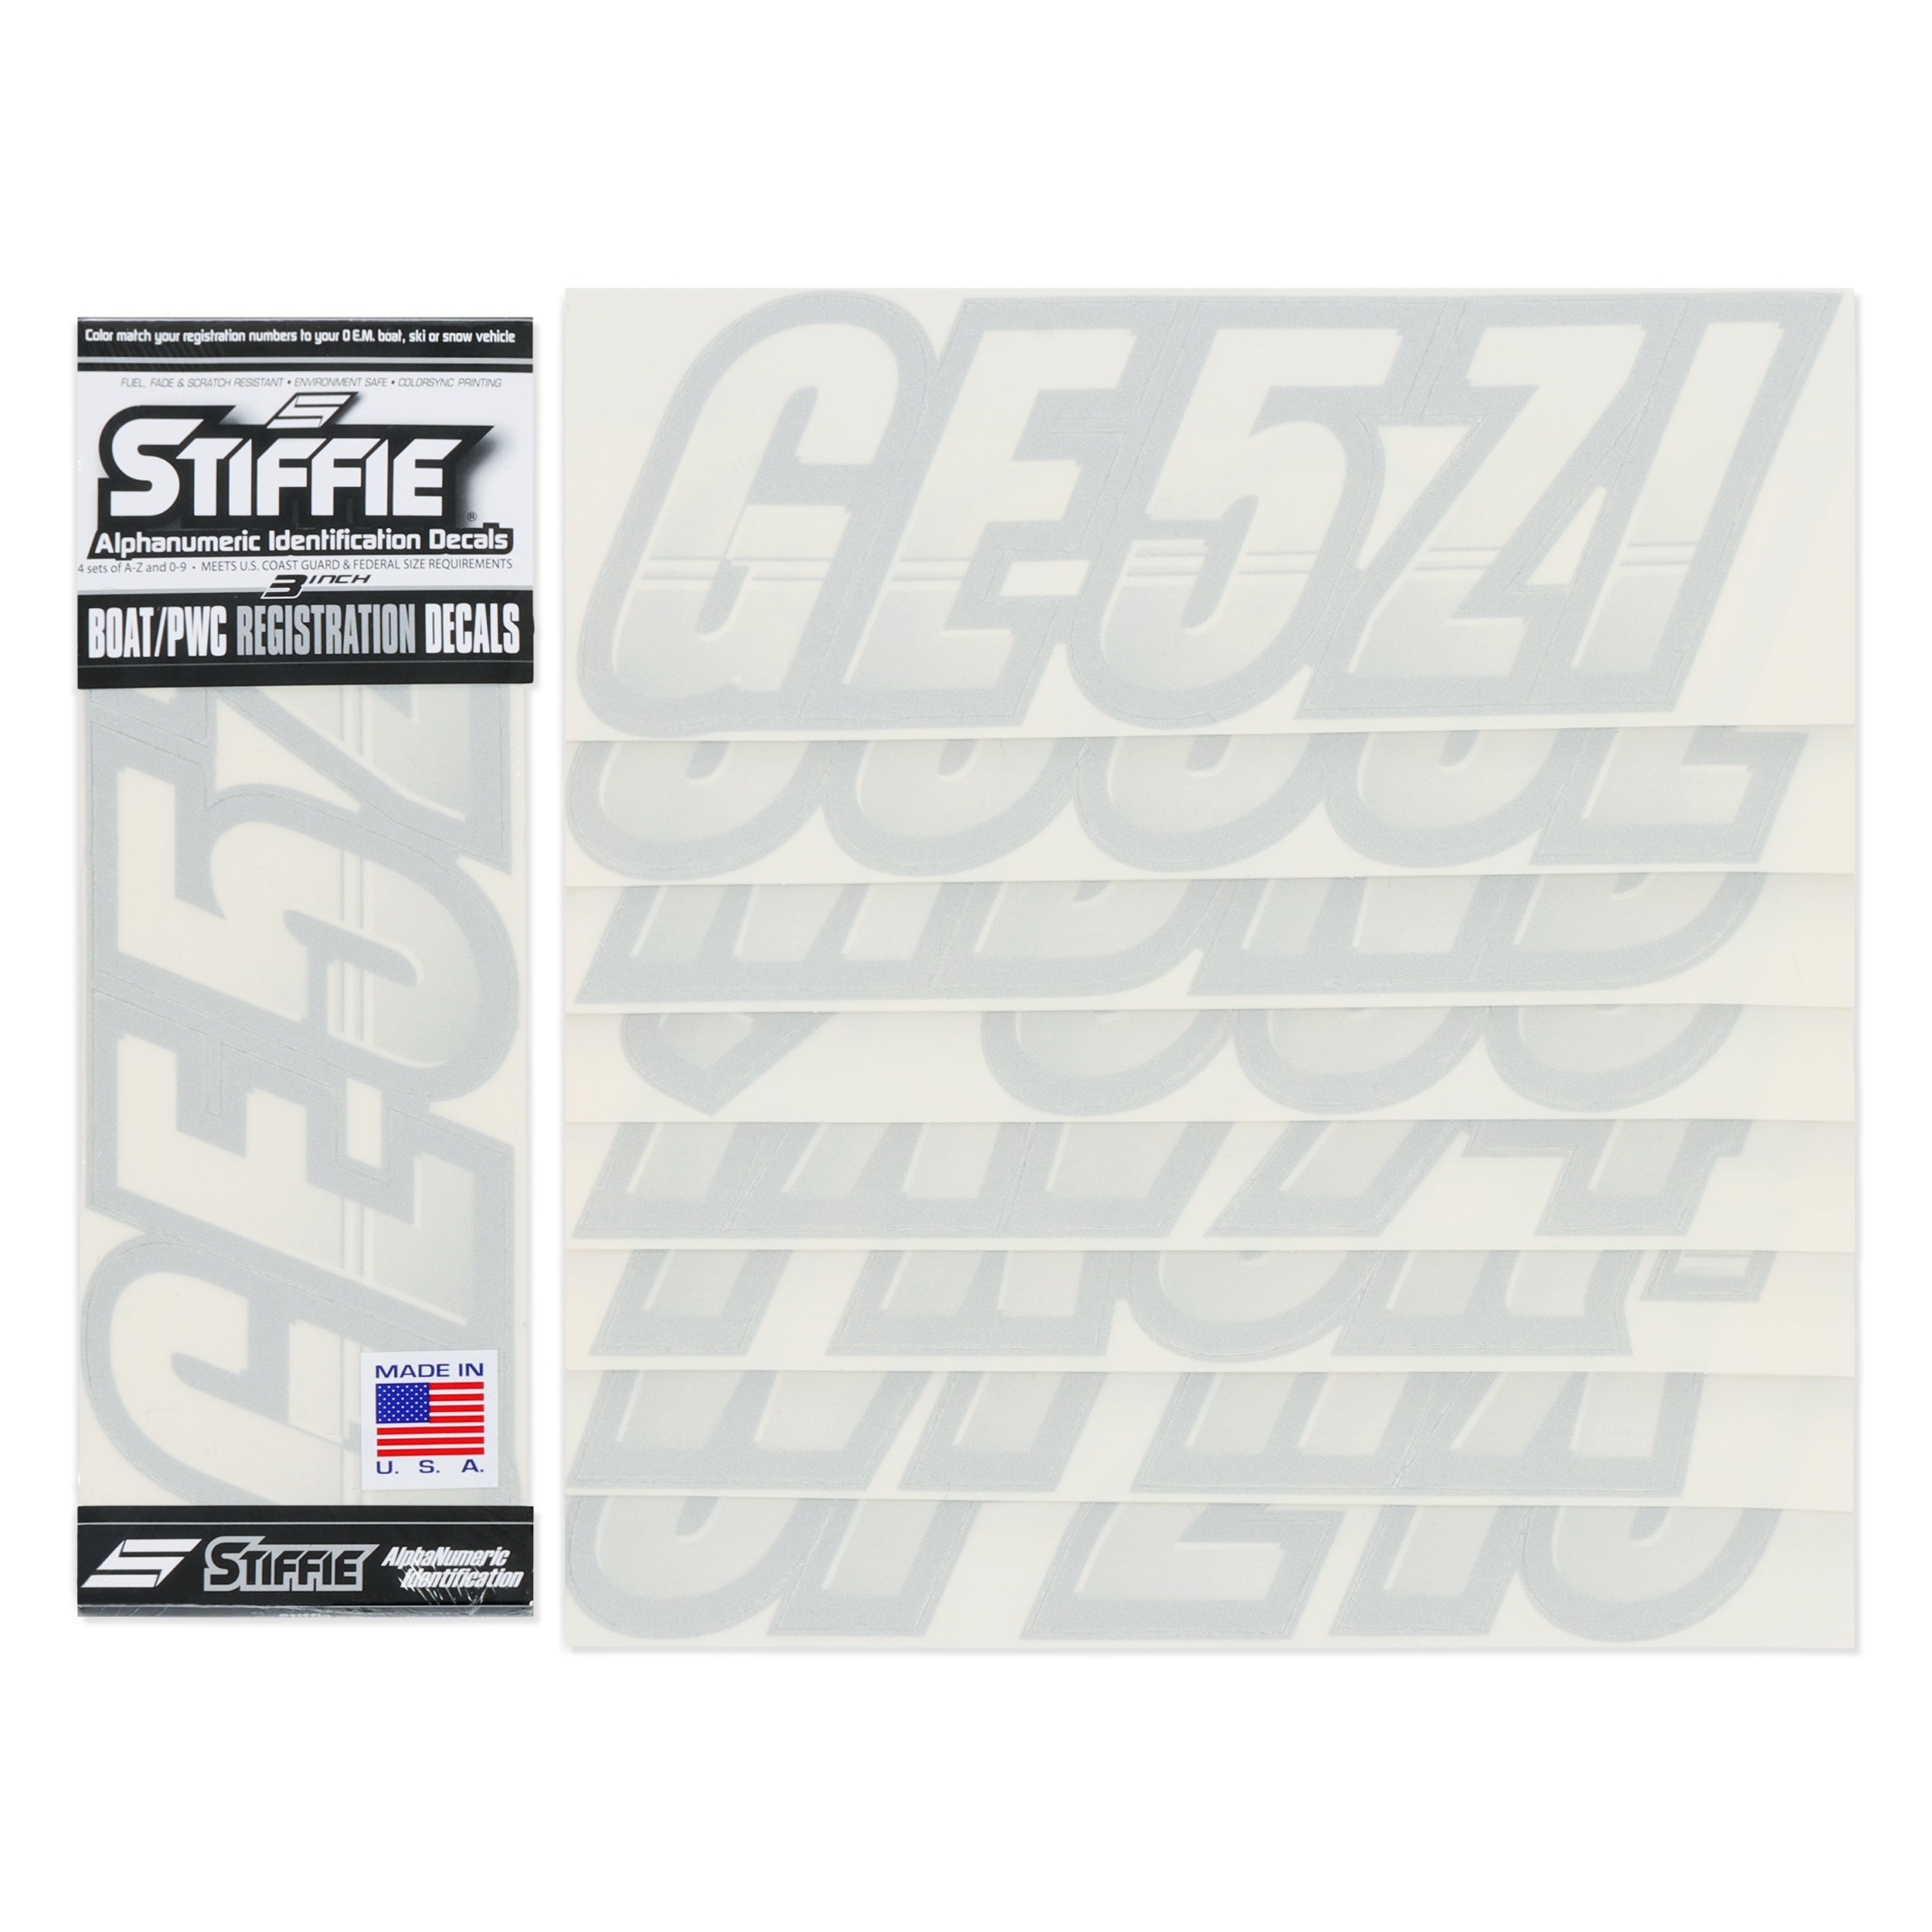 Stiffie Techtron Transparent Clear/Silver 3" Alpha-Numeric Registration Identification Numbers Stickers Decals for Boats & Personal Watercraft